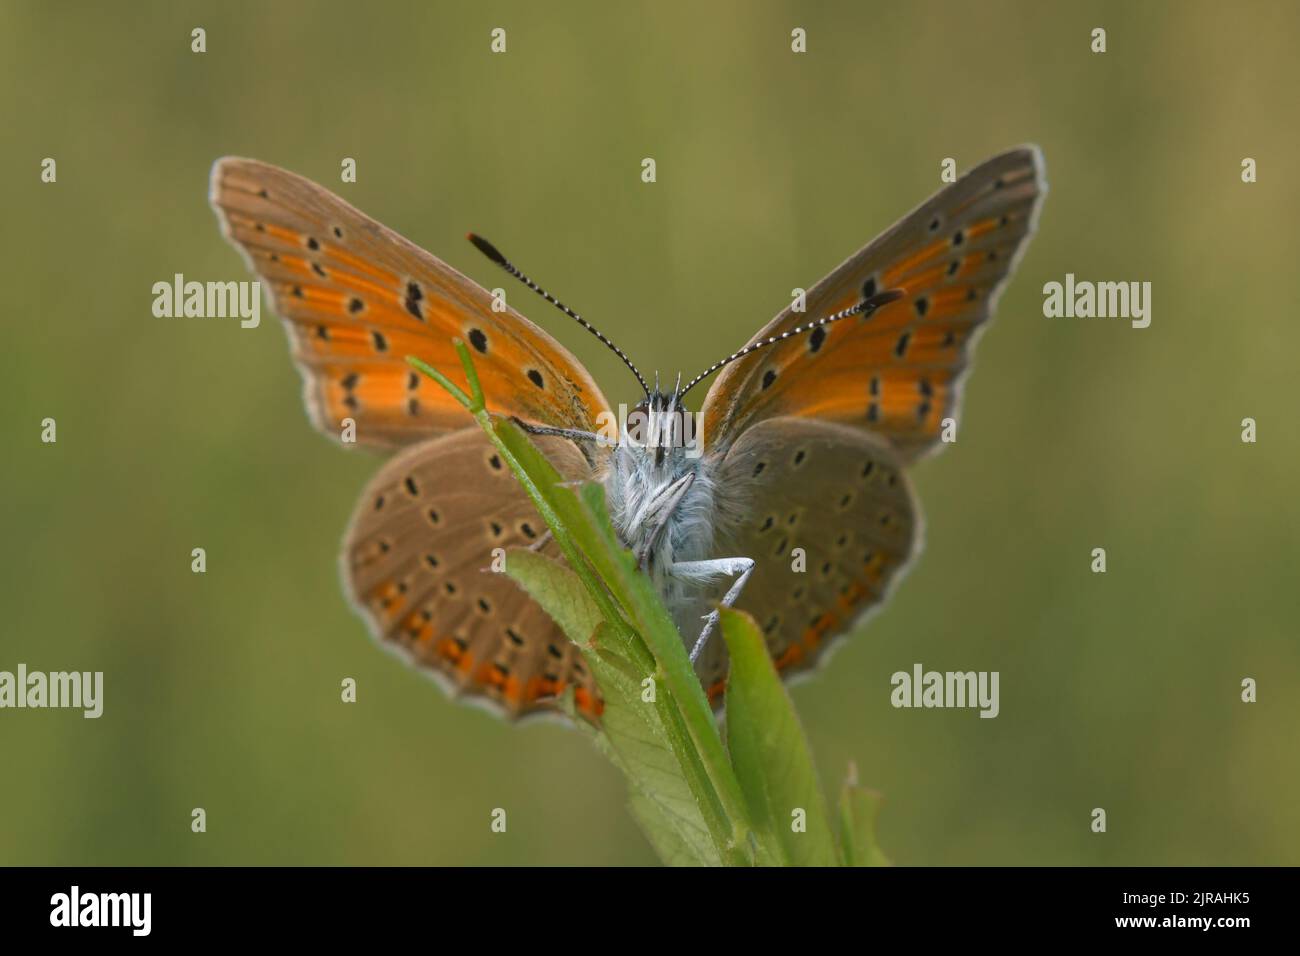 Orange butterfly on green background Stock Photo